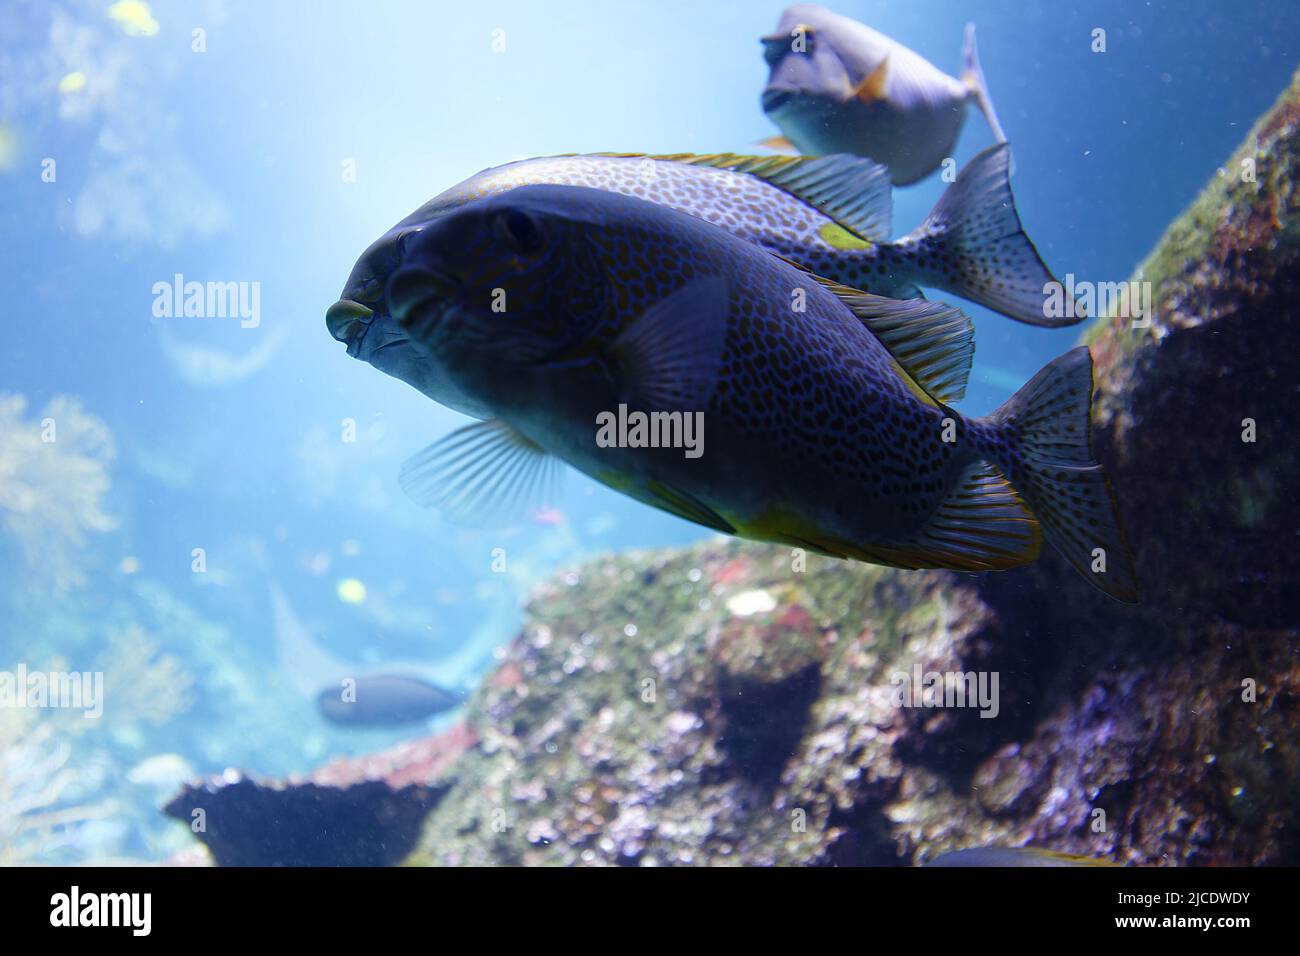 Giant grouper or brown spotted grouper fish swimming under green sea water . Stock Photo